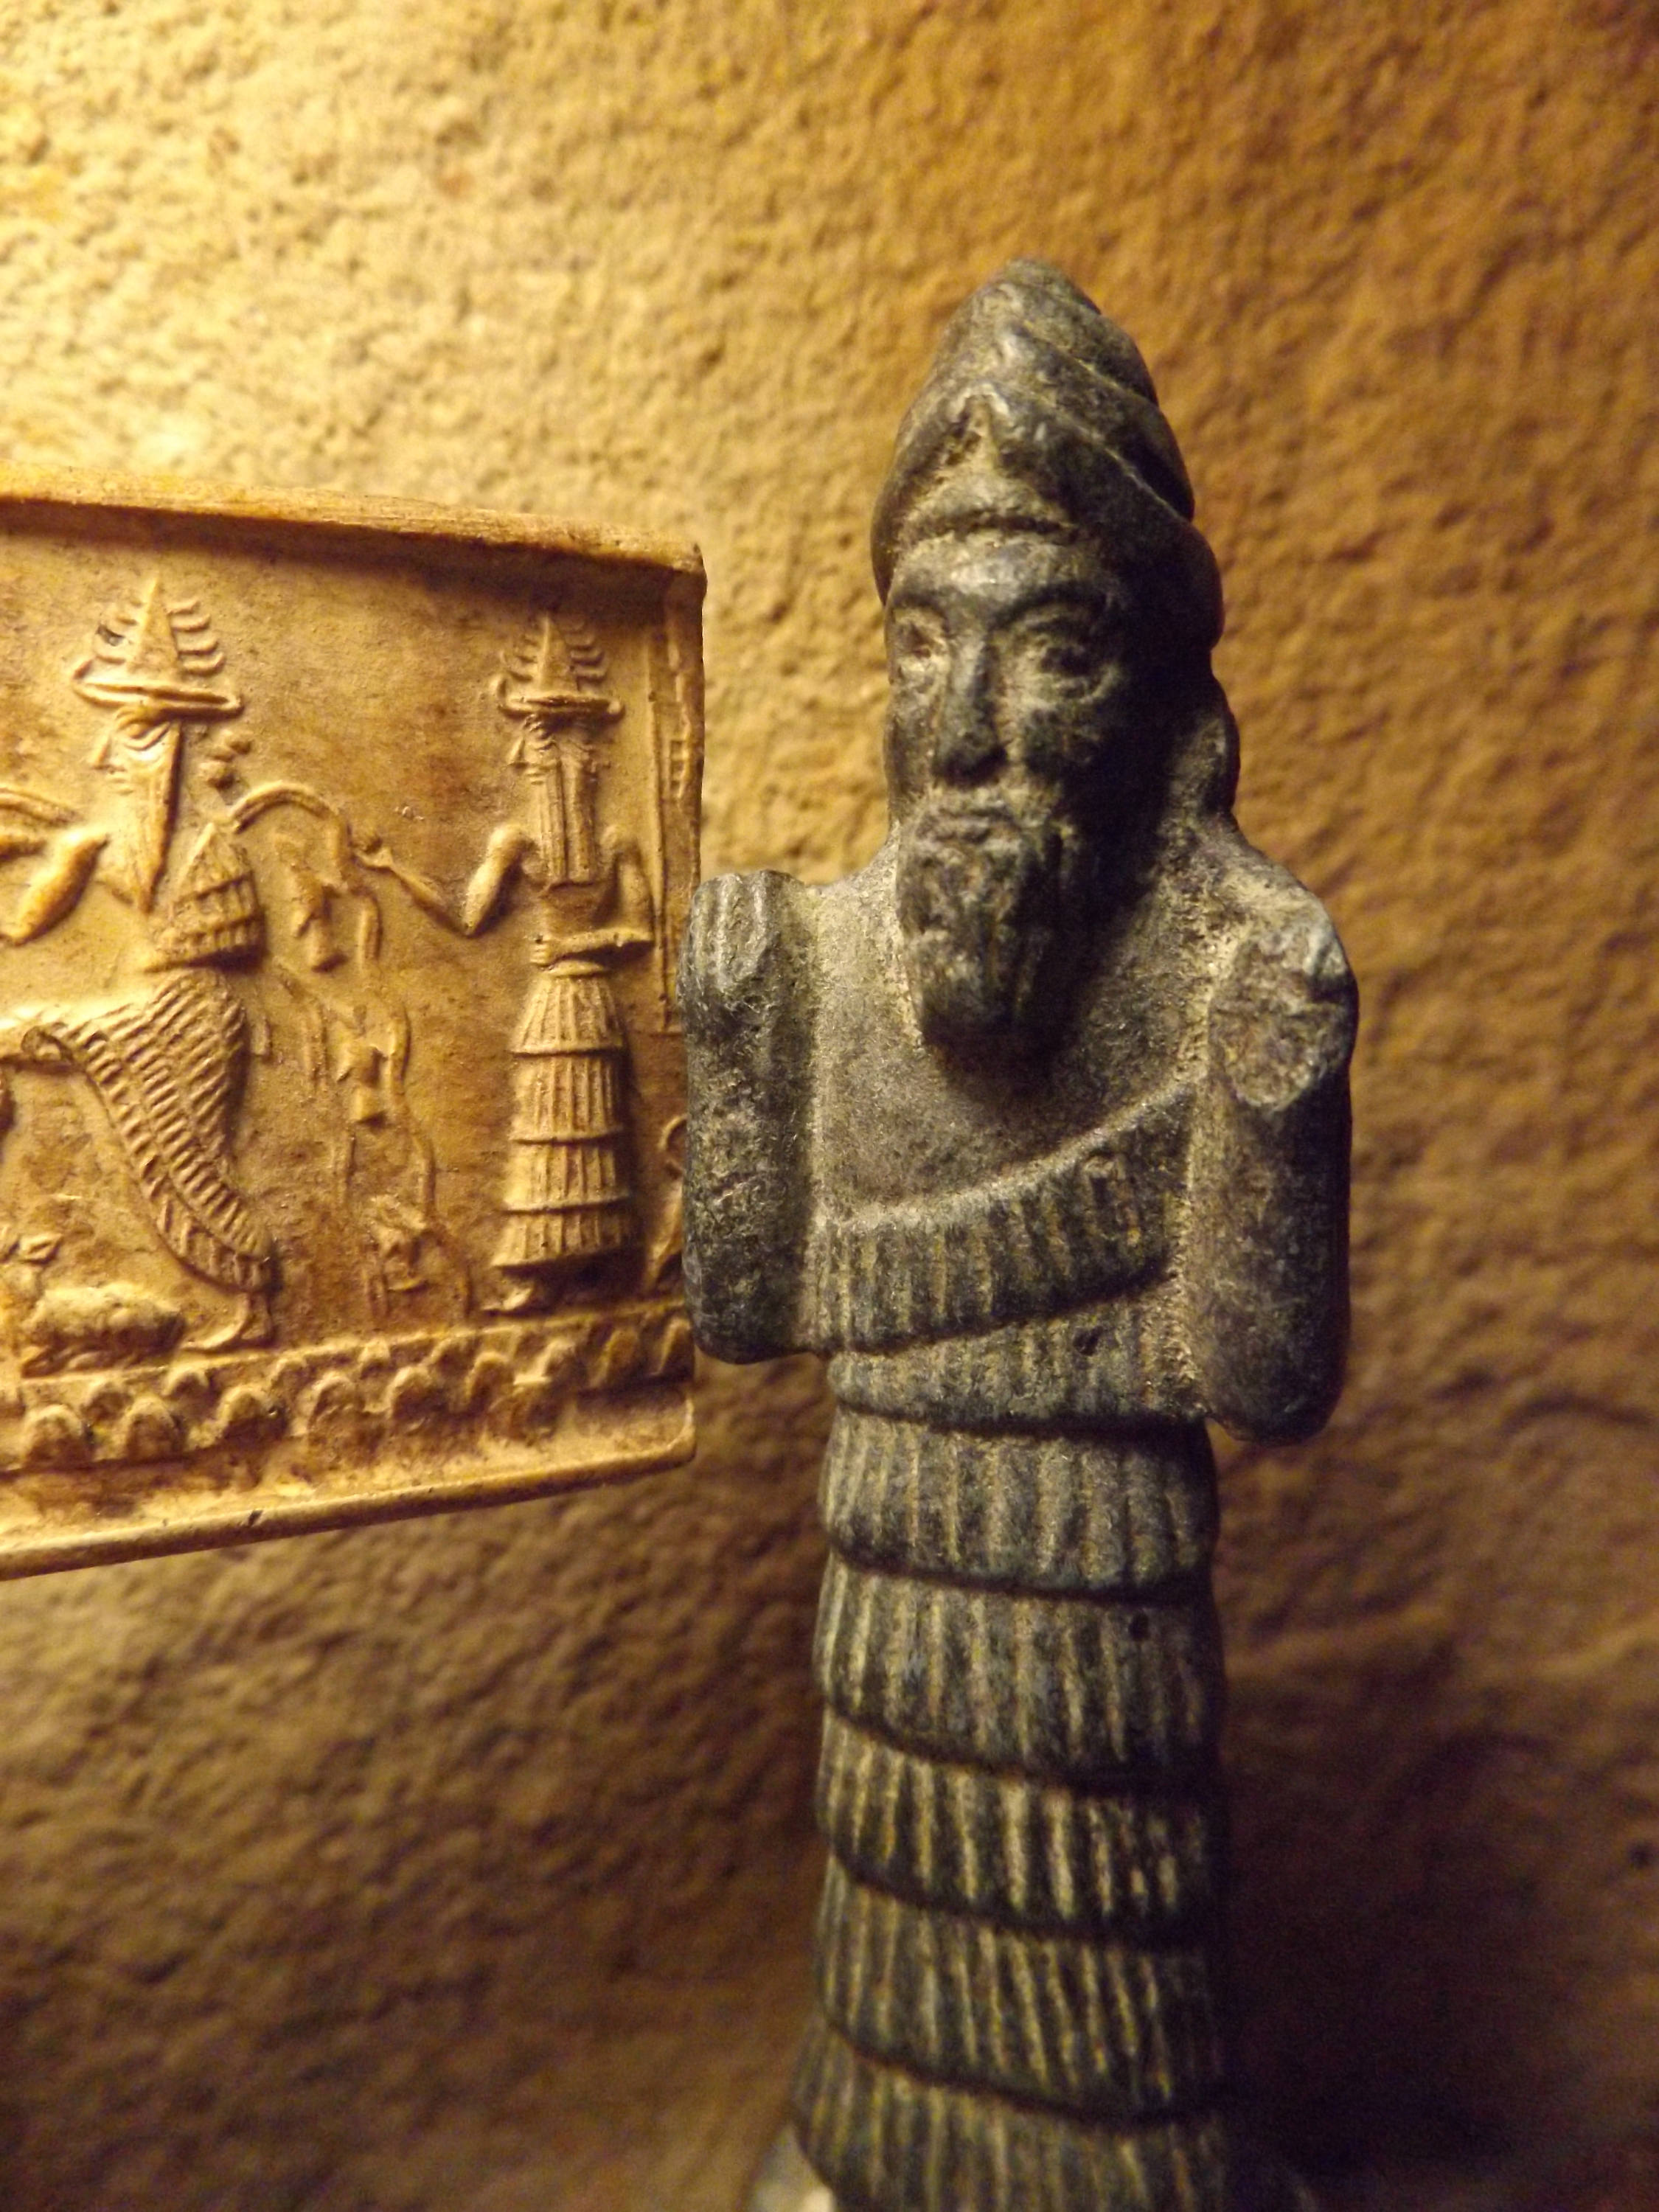 1c - Enki statue artifact with another Enki artifact on the wall; Enki was the oldest & wisest of the royal Anunnaki who came down to Earth, he was the sole keeper of the MEs, knowledge on discs